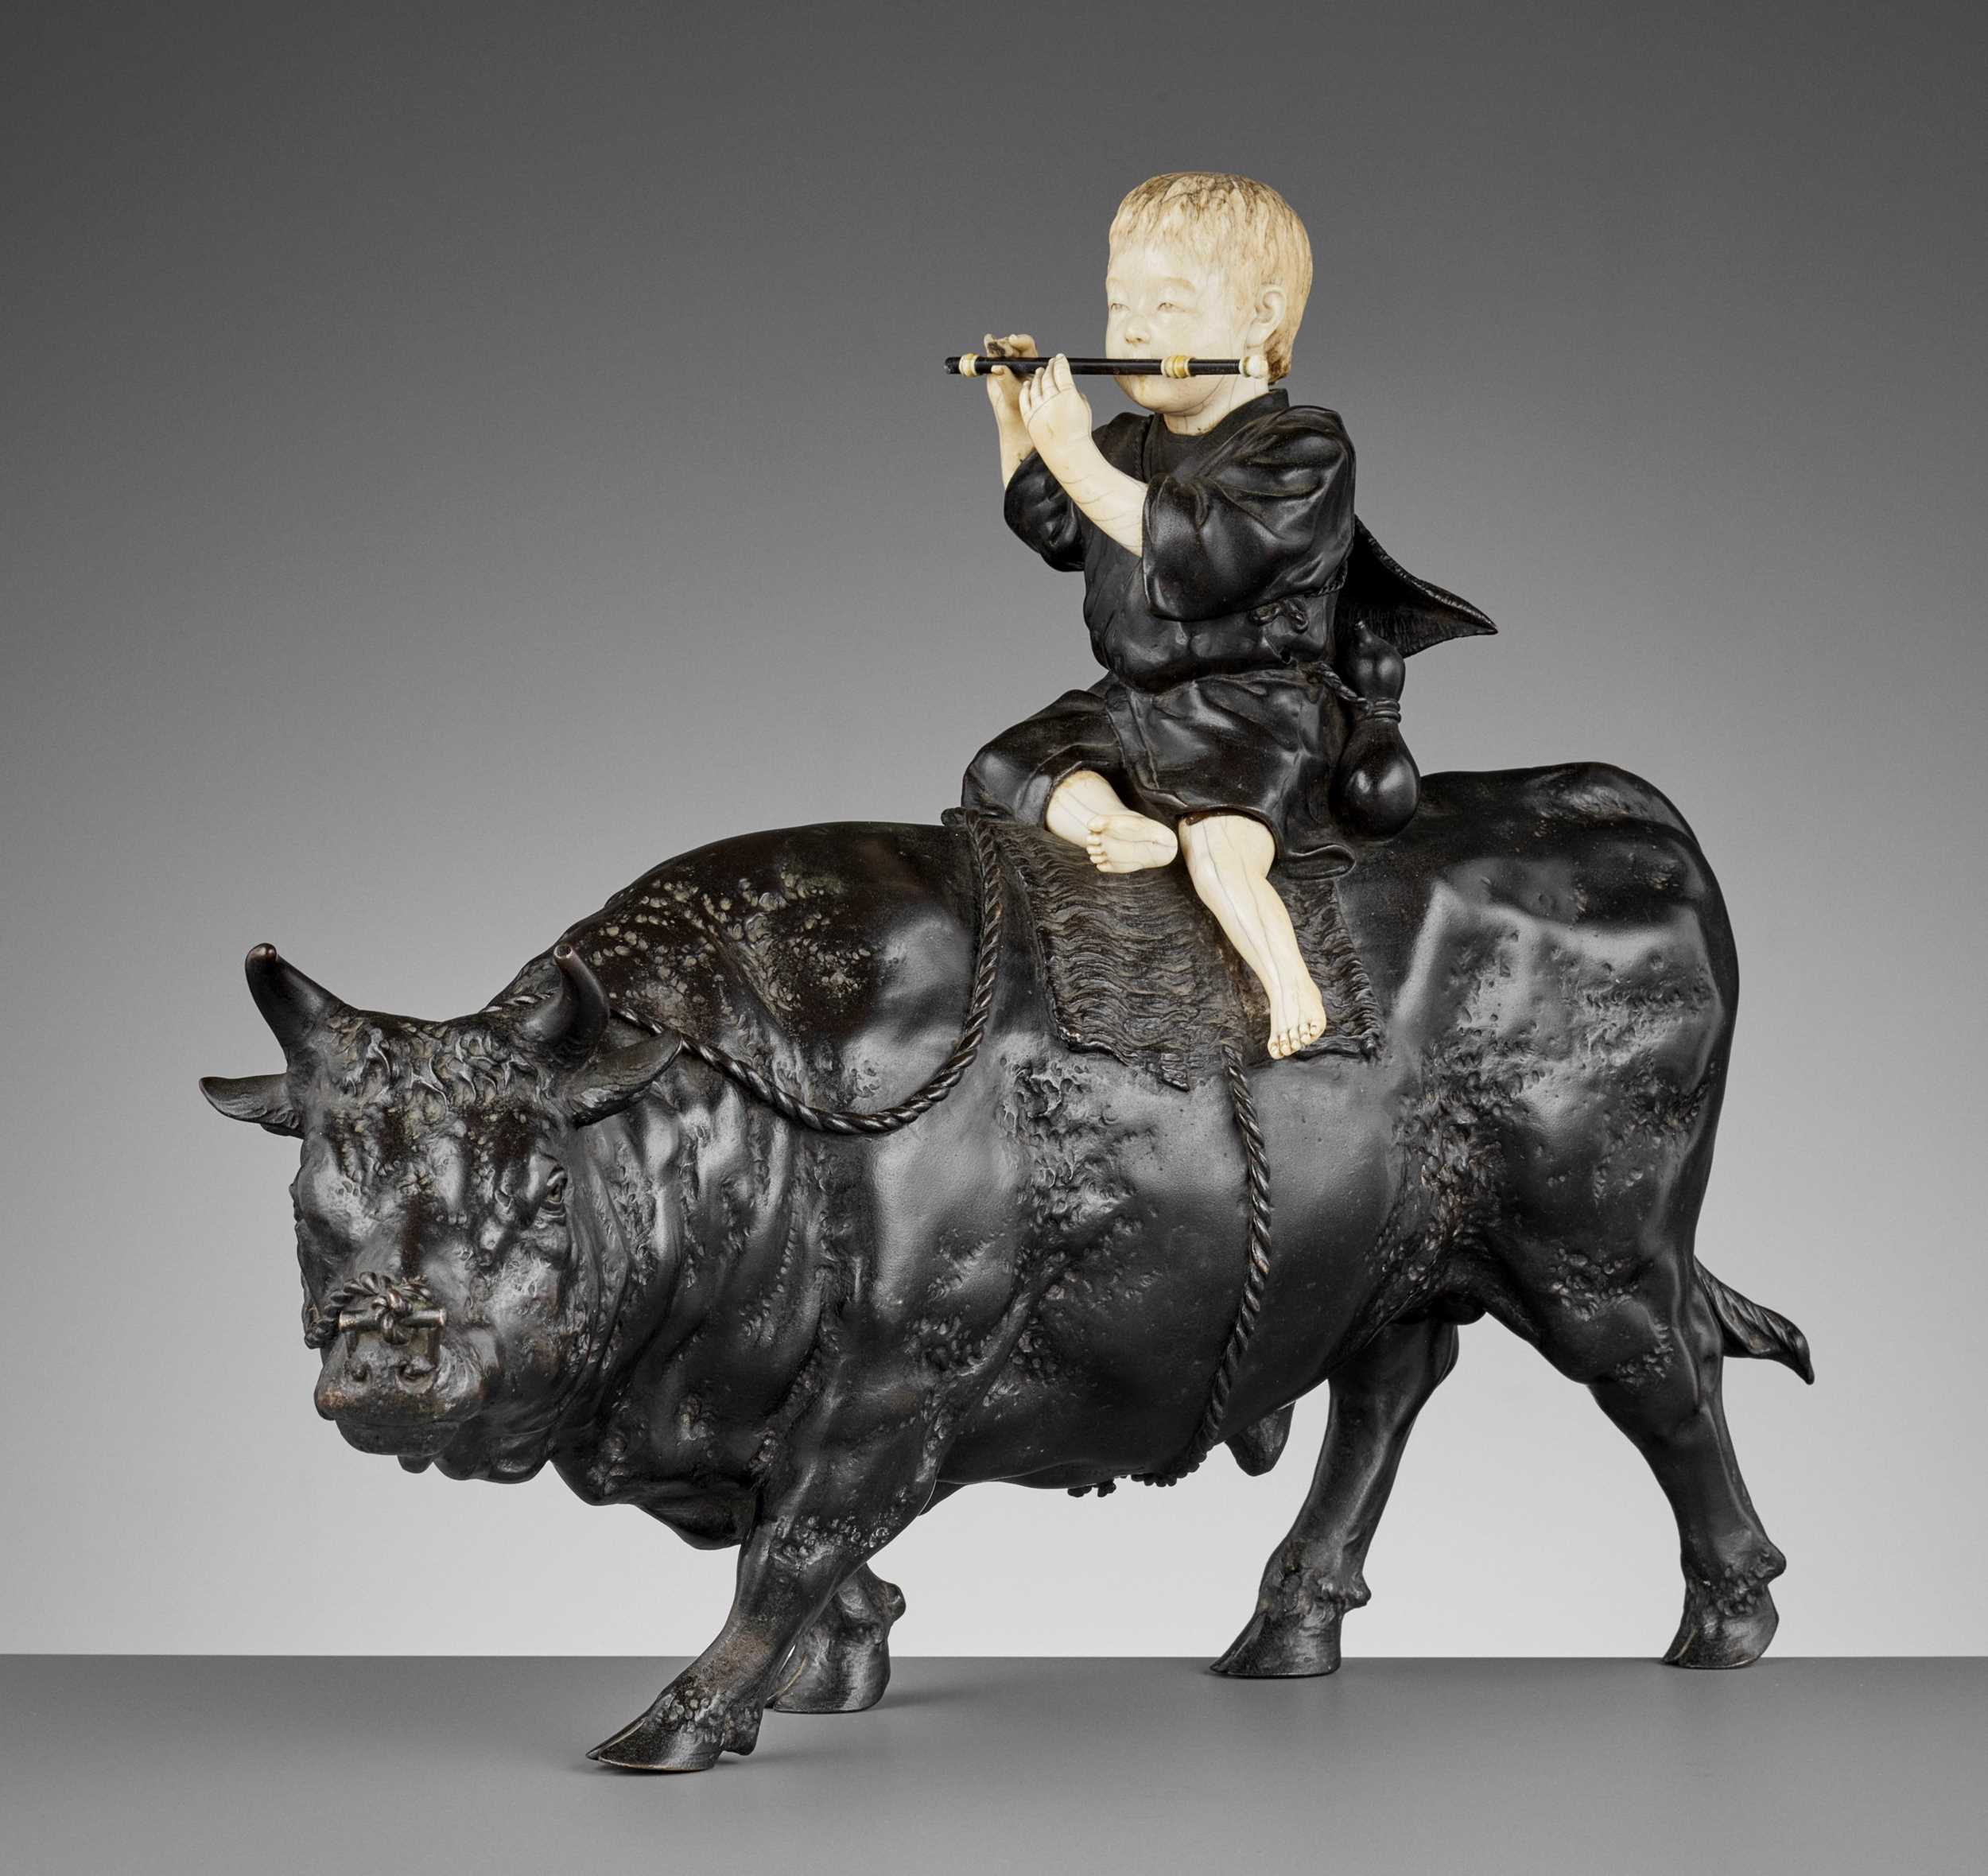 Lot 14 - KIMURA HARUMITSU: A SUPERB AND MASSIVE IVORY AND BRONZE TOKYO SCHOOL OKIMONO OF AN OX HERDER WITH OX